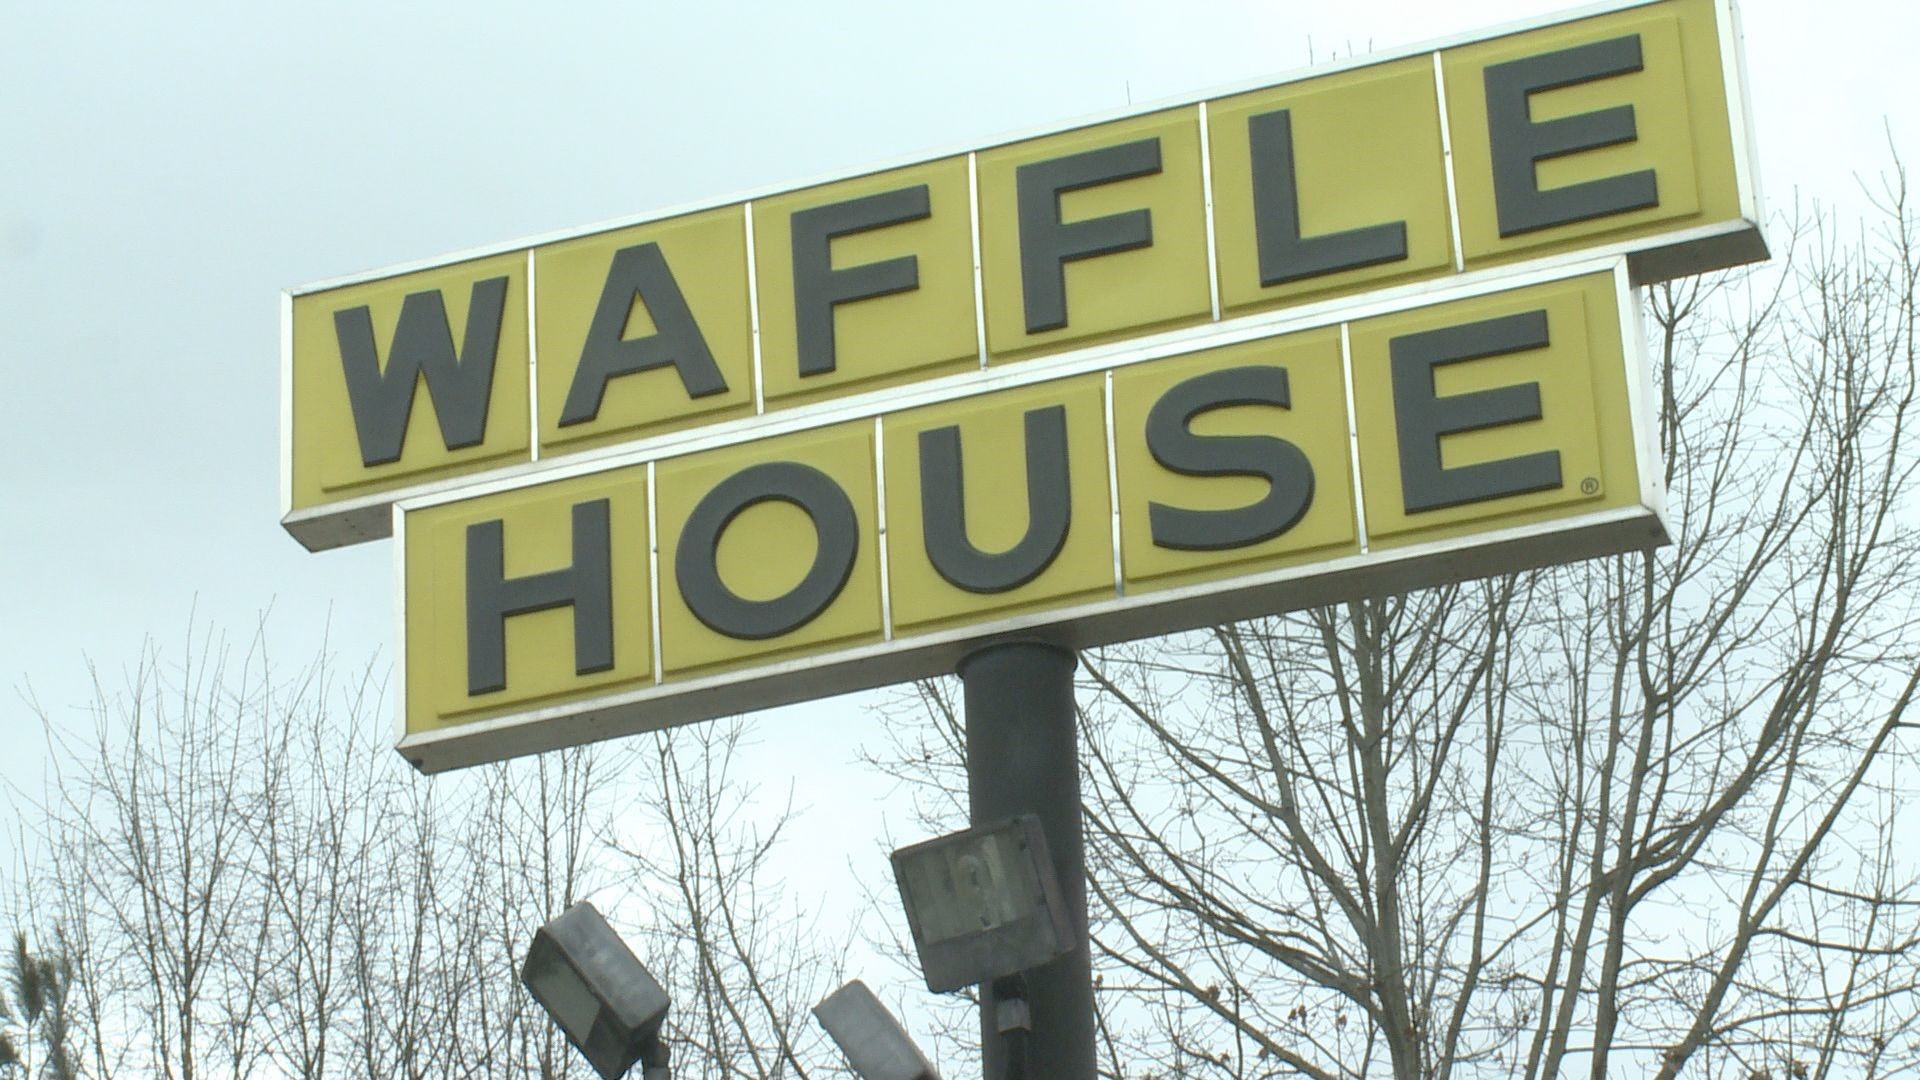 Waffle House is probably seeing a $61 million increase based on current egg prices.